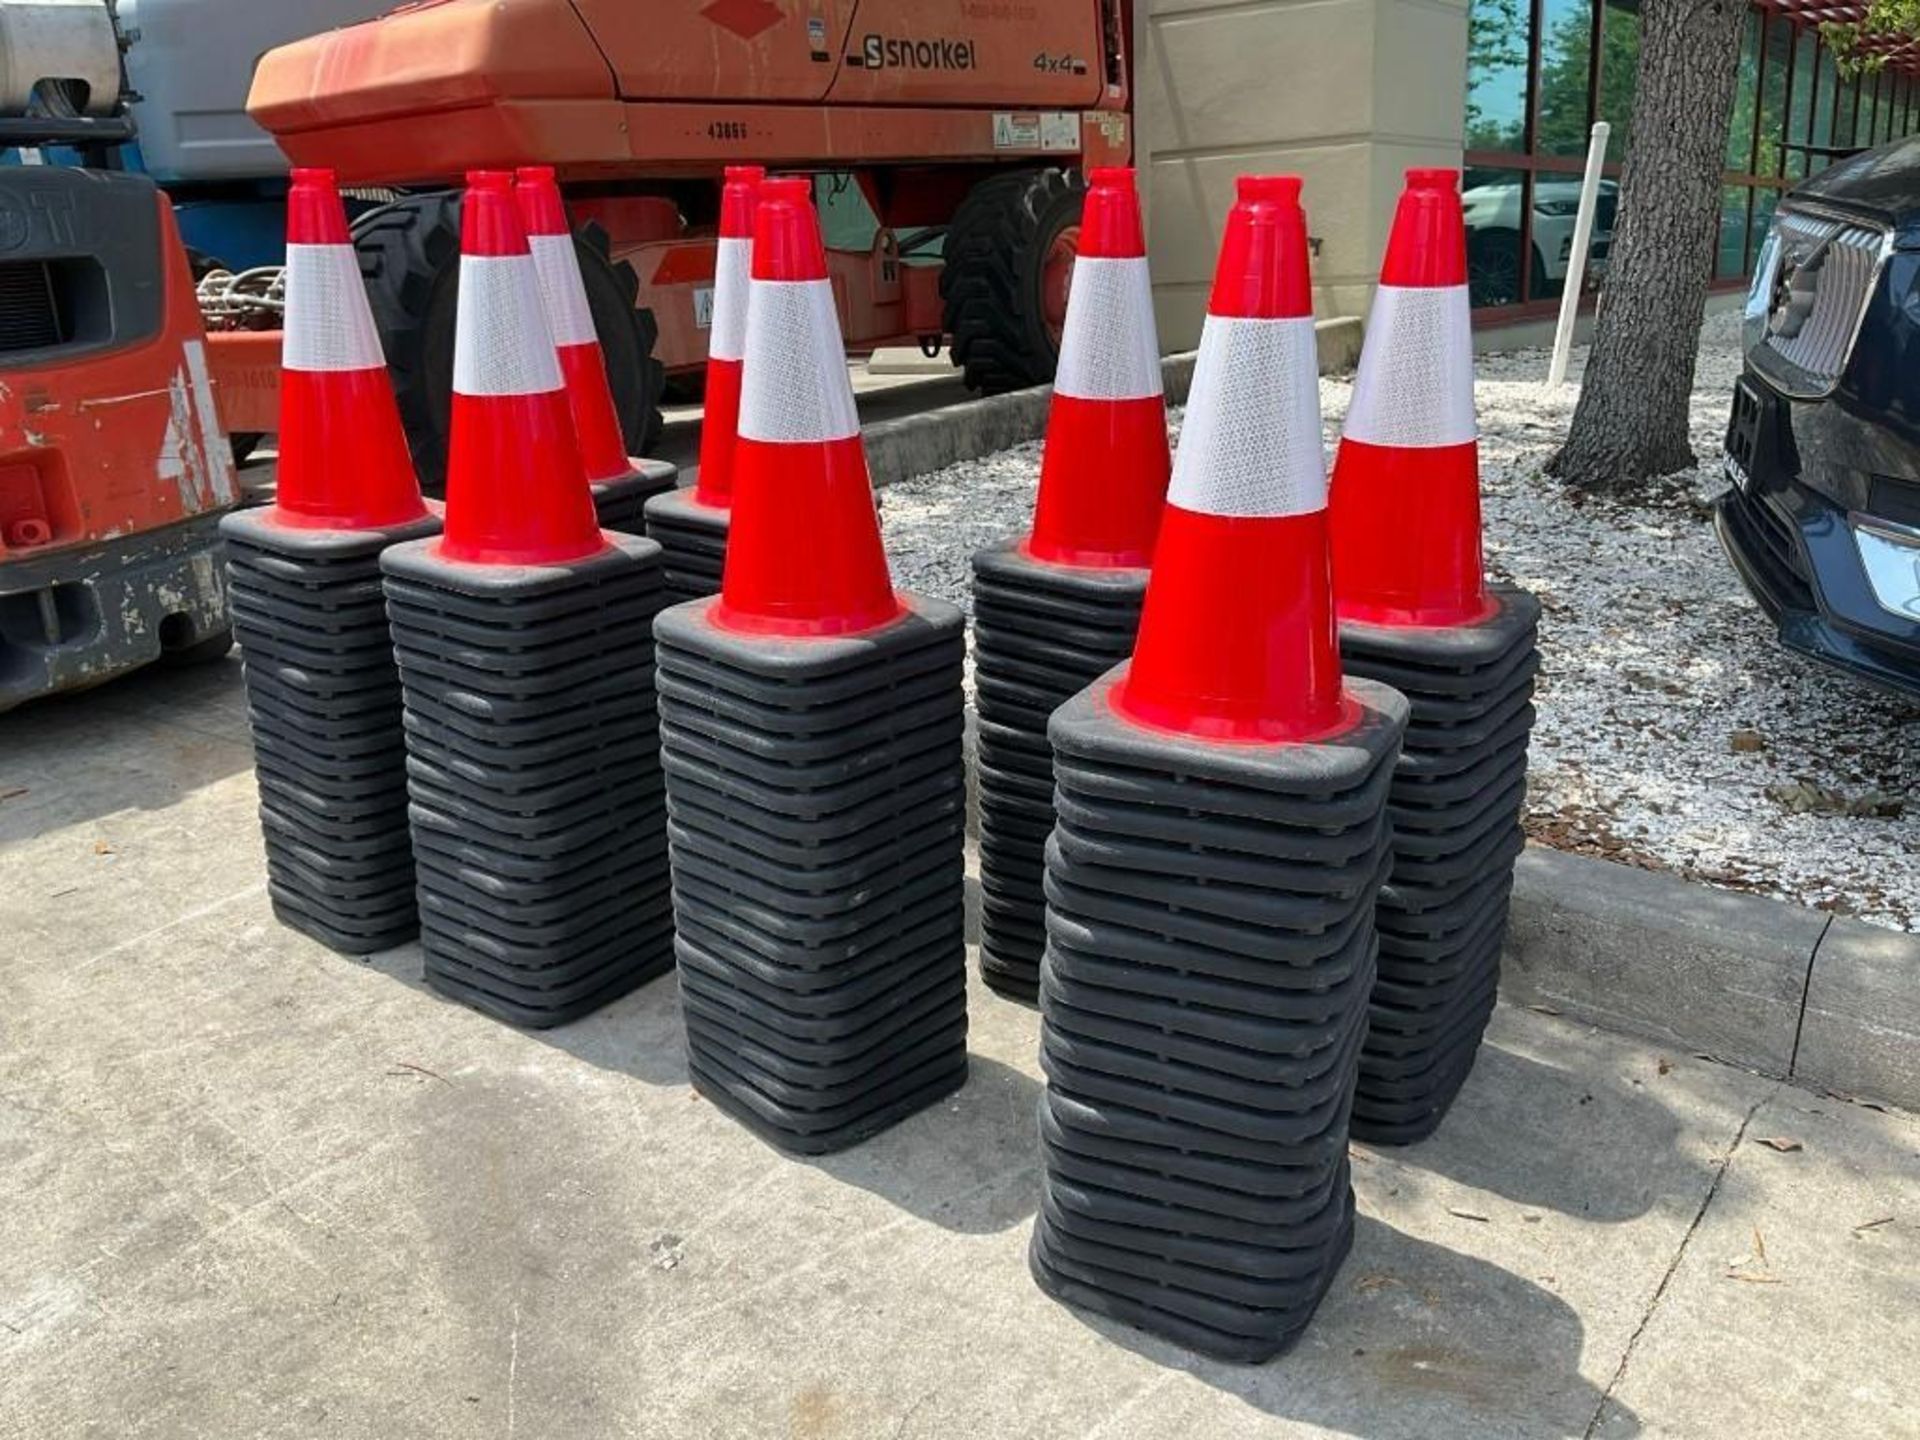 20 SAFETY CONES, 18in TALL - Image 3 of 5